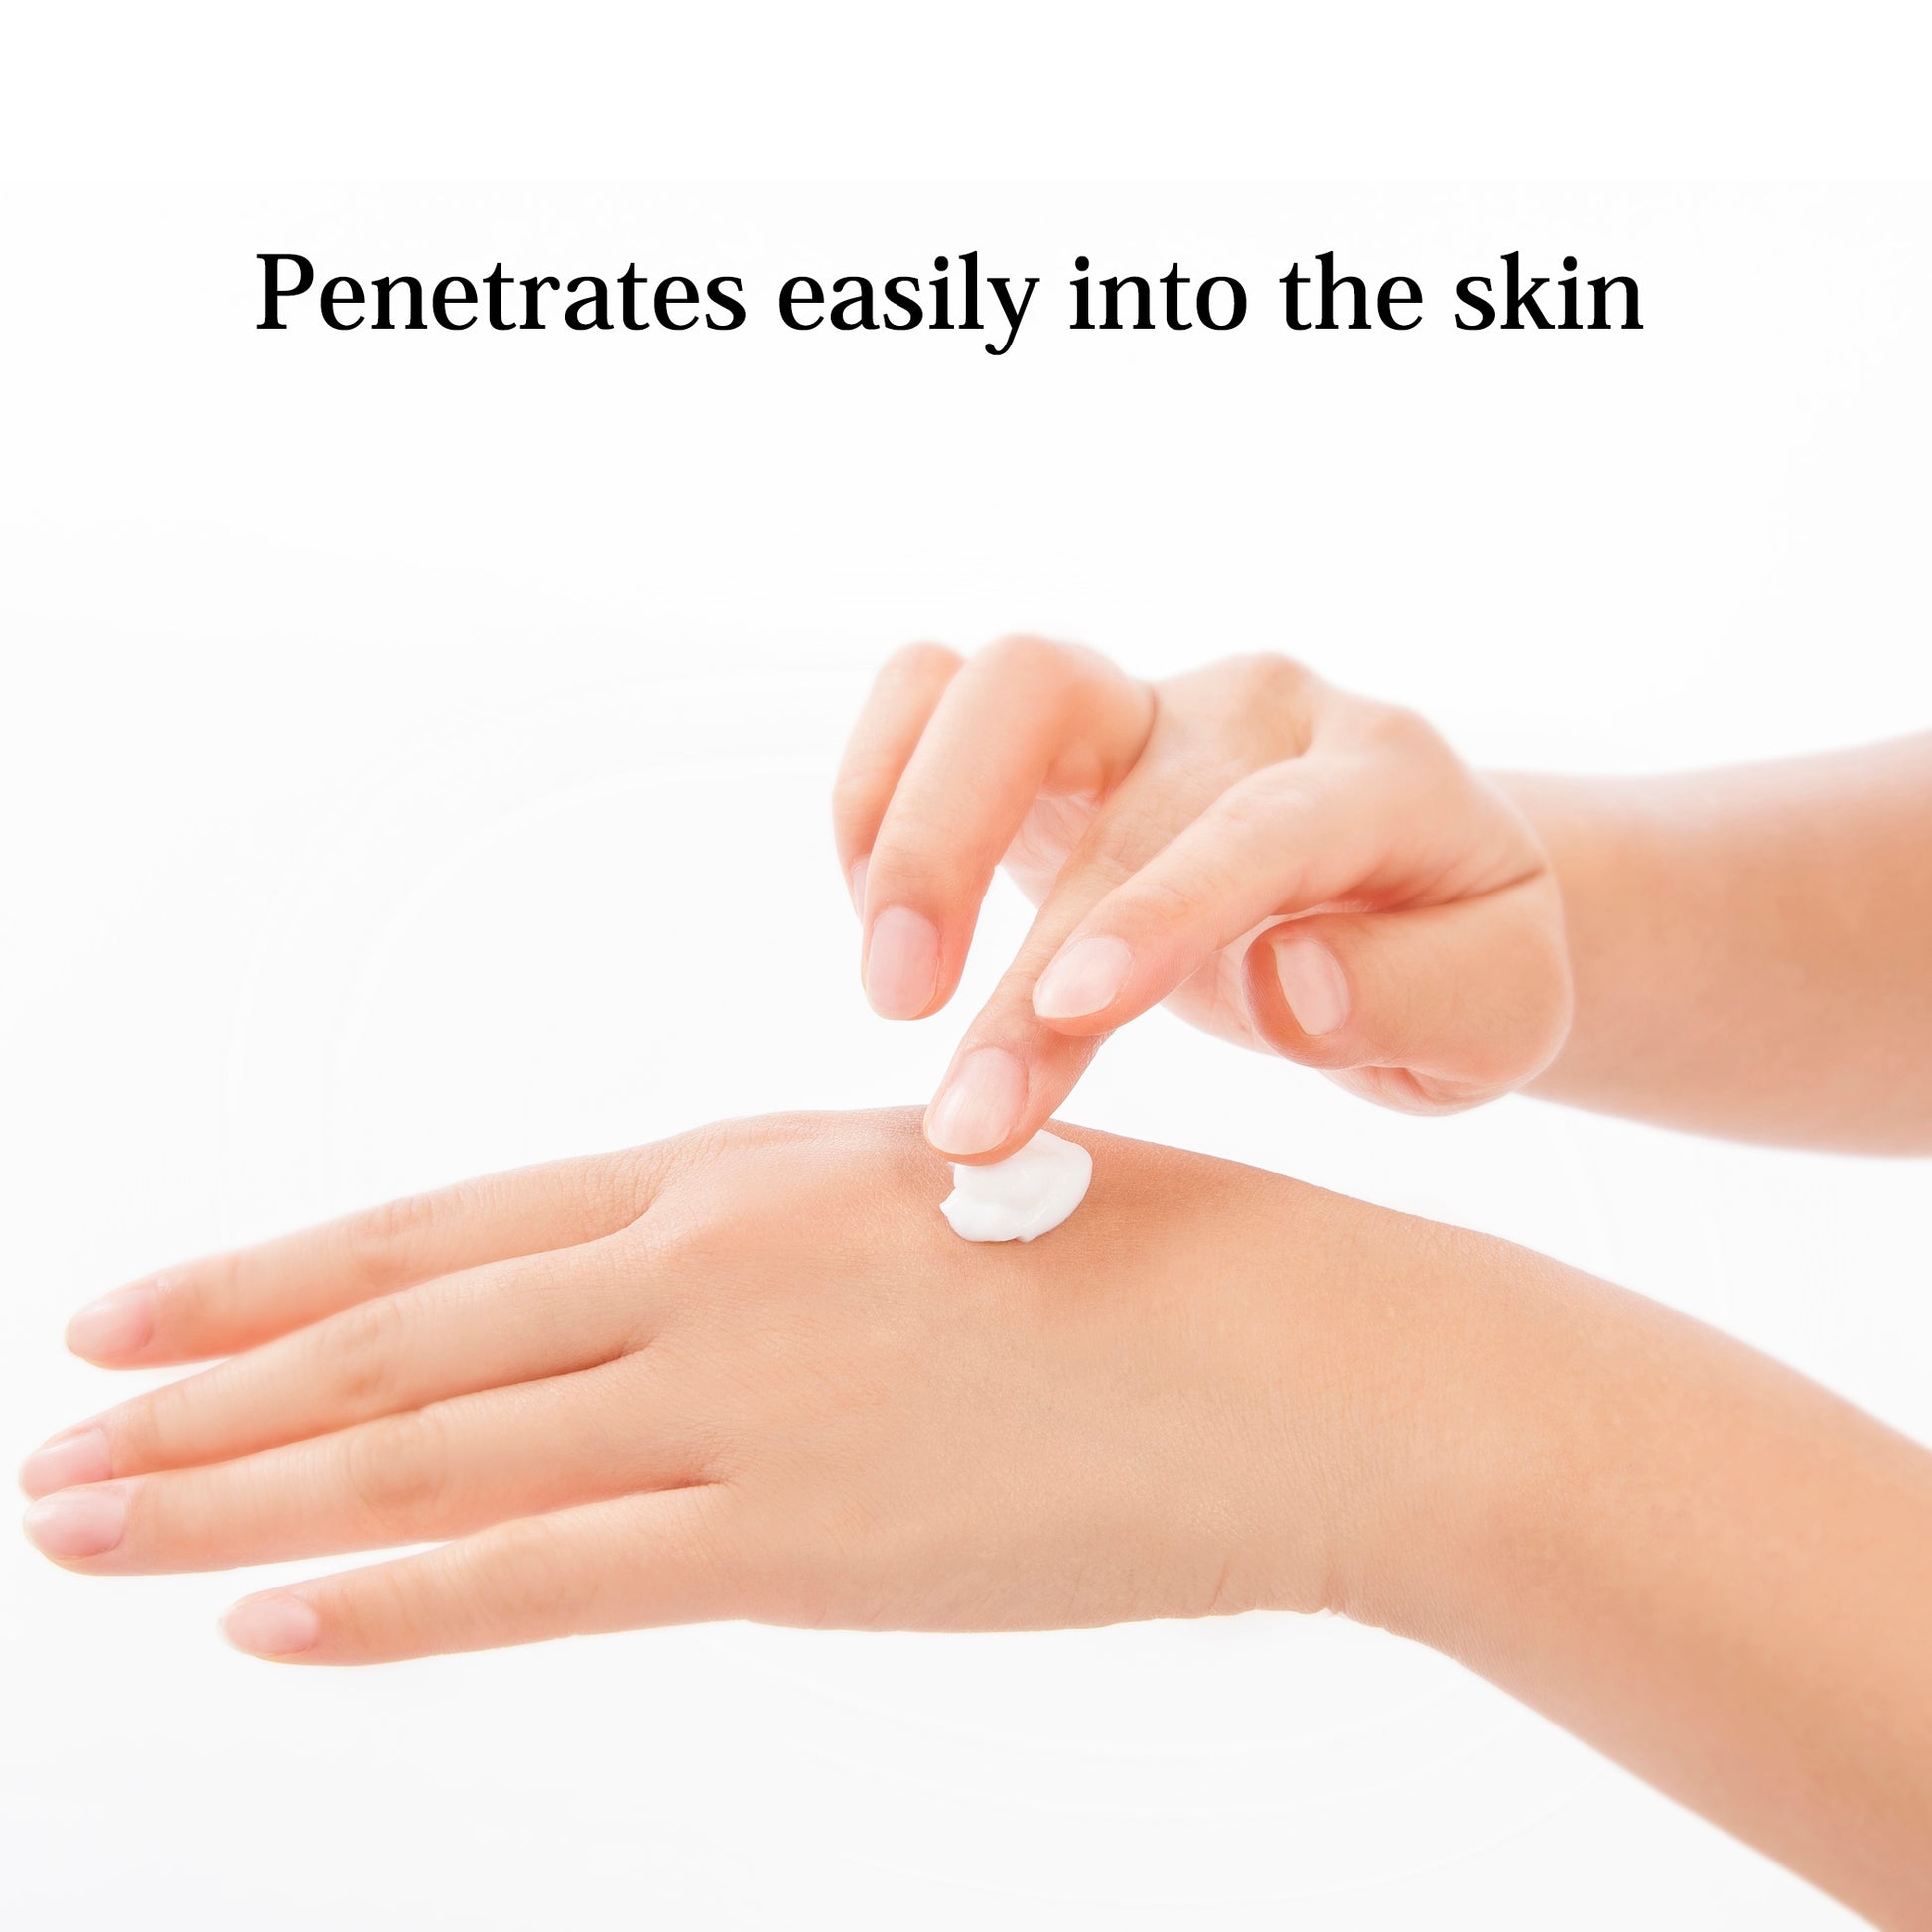 Penetrates easily into the skin